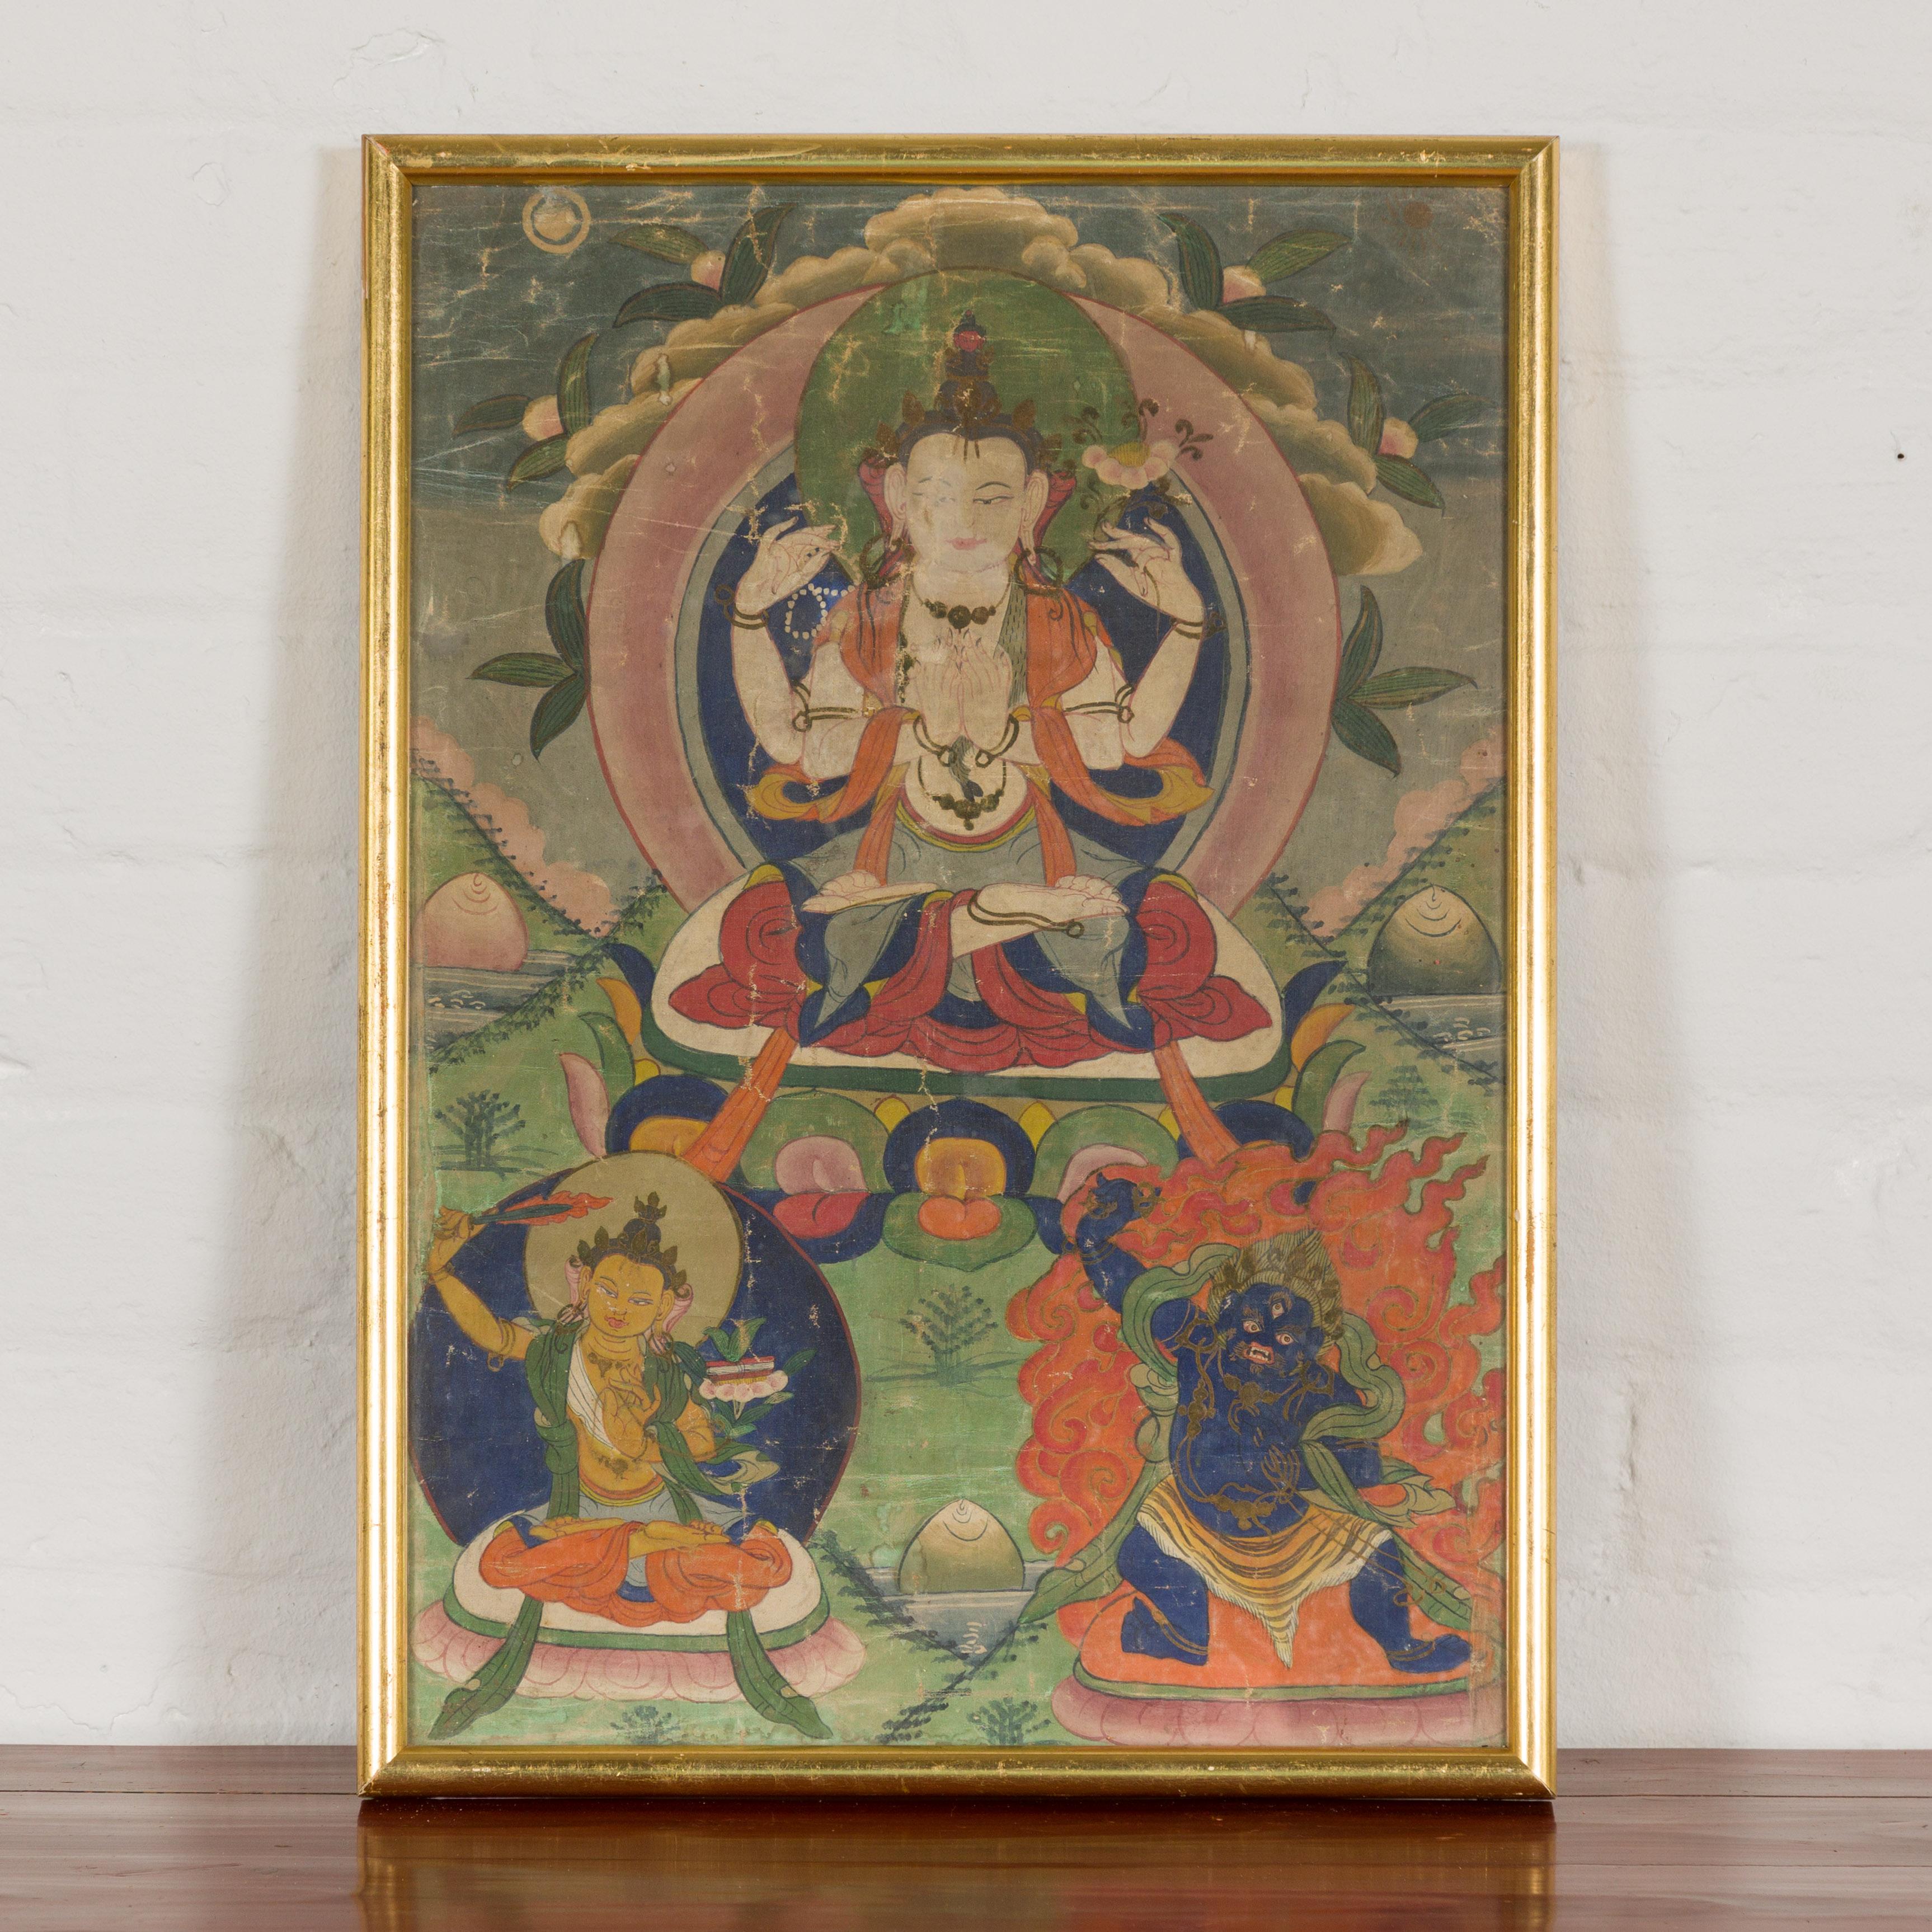 A Tibetan Thangka Buddhist painting hand-painted on canvas, created for the veneration of the Three Great Bodhisattvas. Embrace the rich tradition of Tibetan Buddhism with this vibrant Thangka painting, a radiant piece of devotional art hand-painted